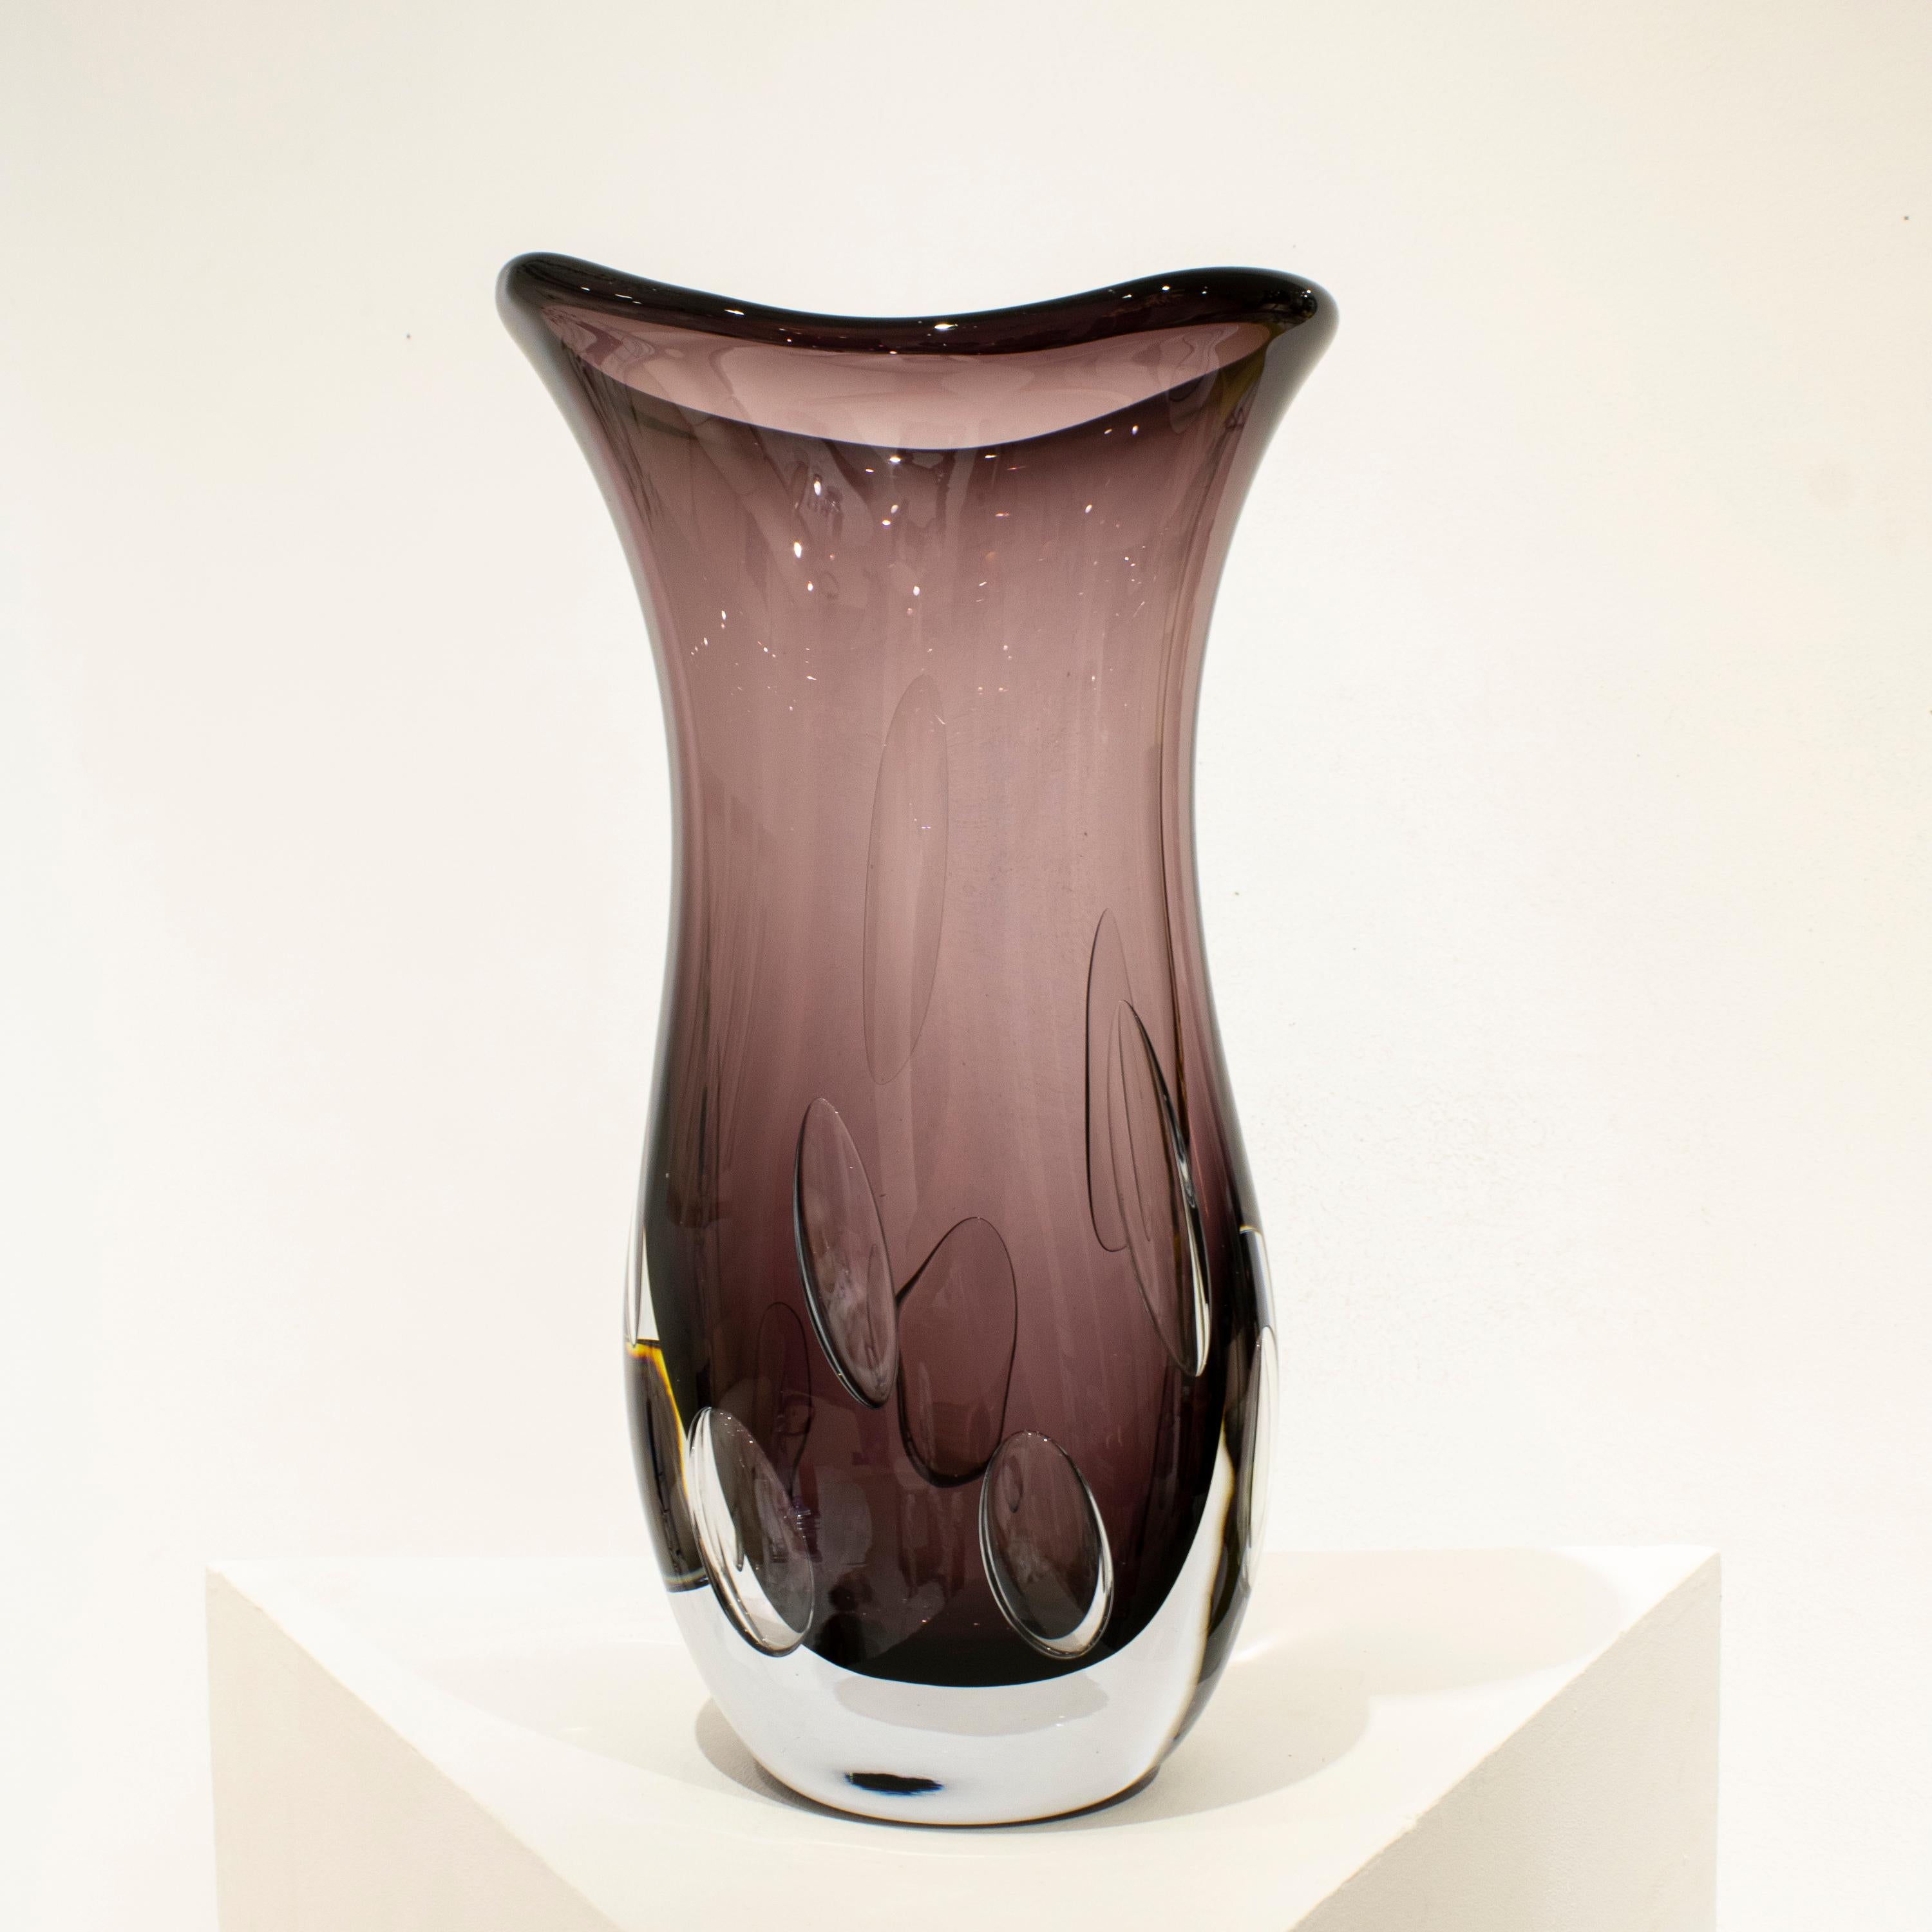 Hand-blown Italian magenta semi-transparent glass vase, with organic shapes and inside bubbles.